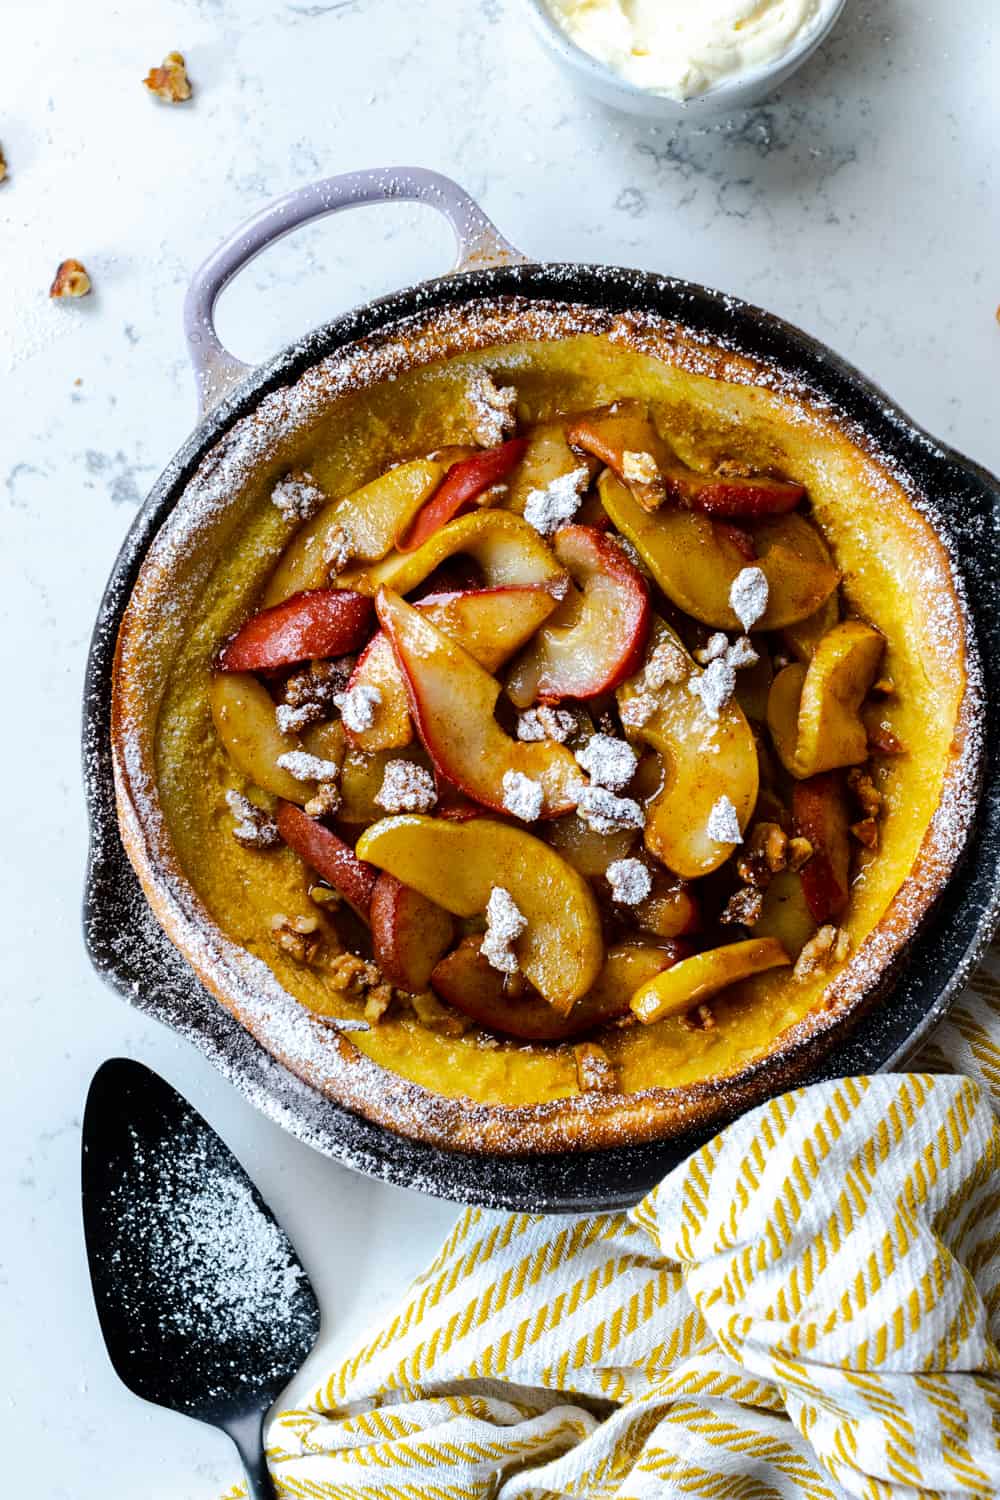 Spiced Pear and Walnut Dutch Baby_Baking the Goods